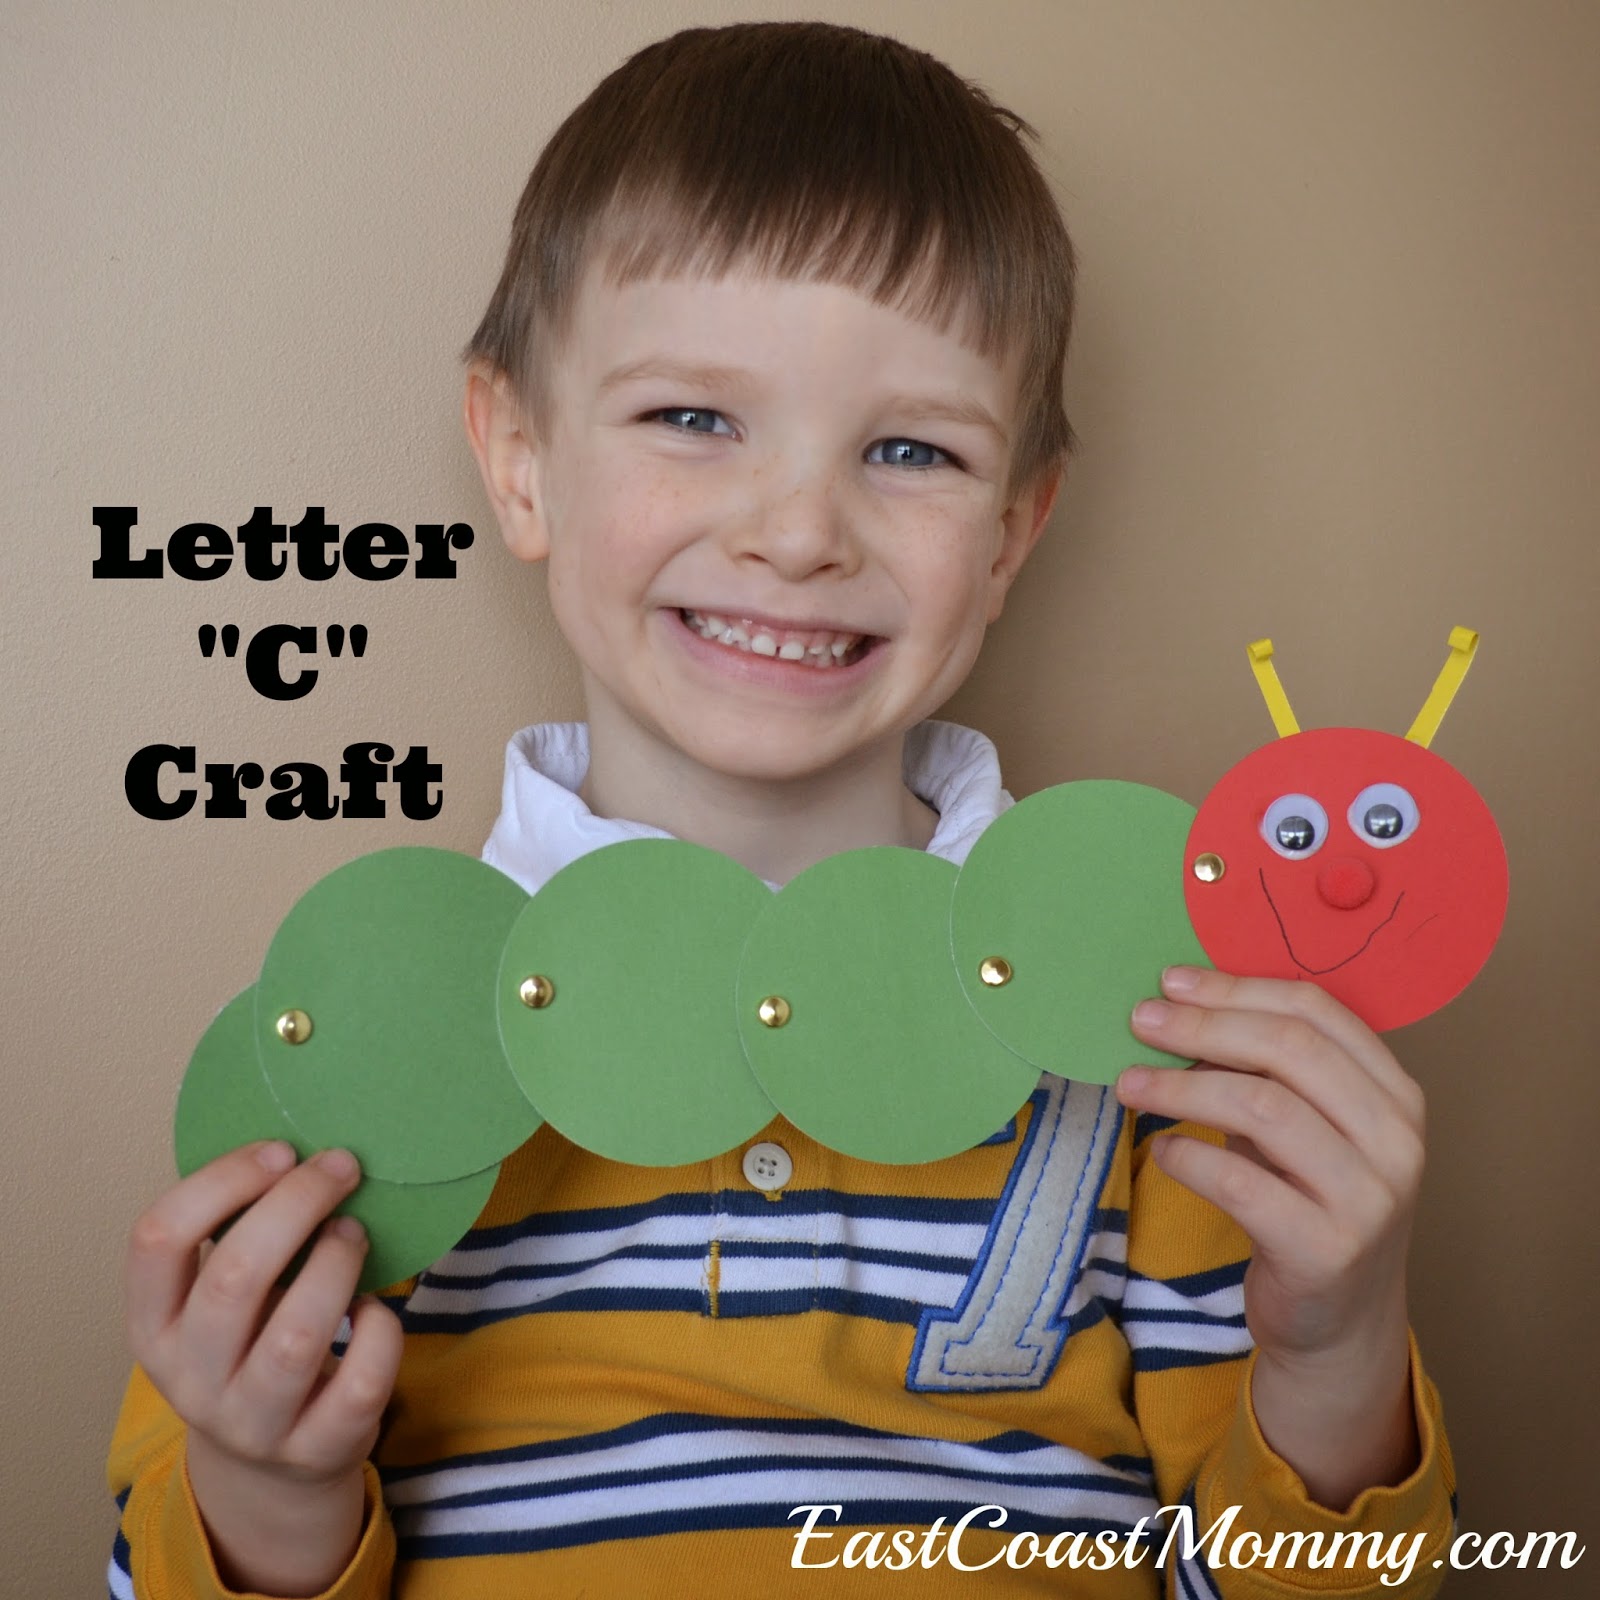 East Coast Mommy: Alphabet Crafts - Letter C